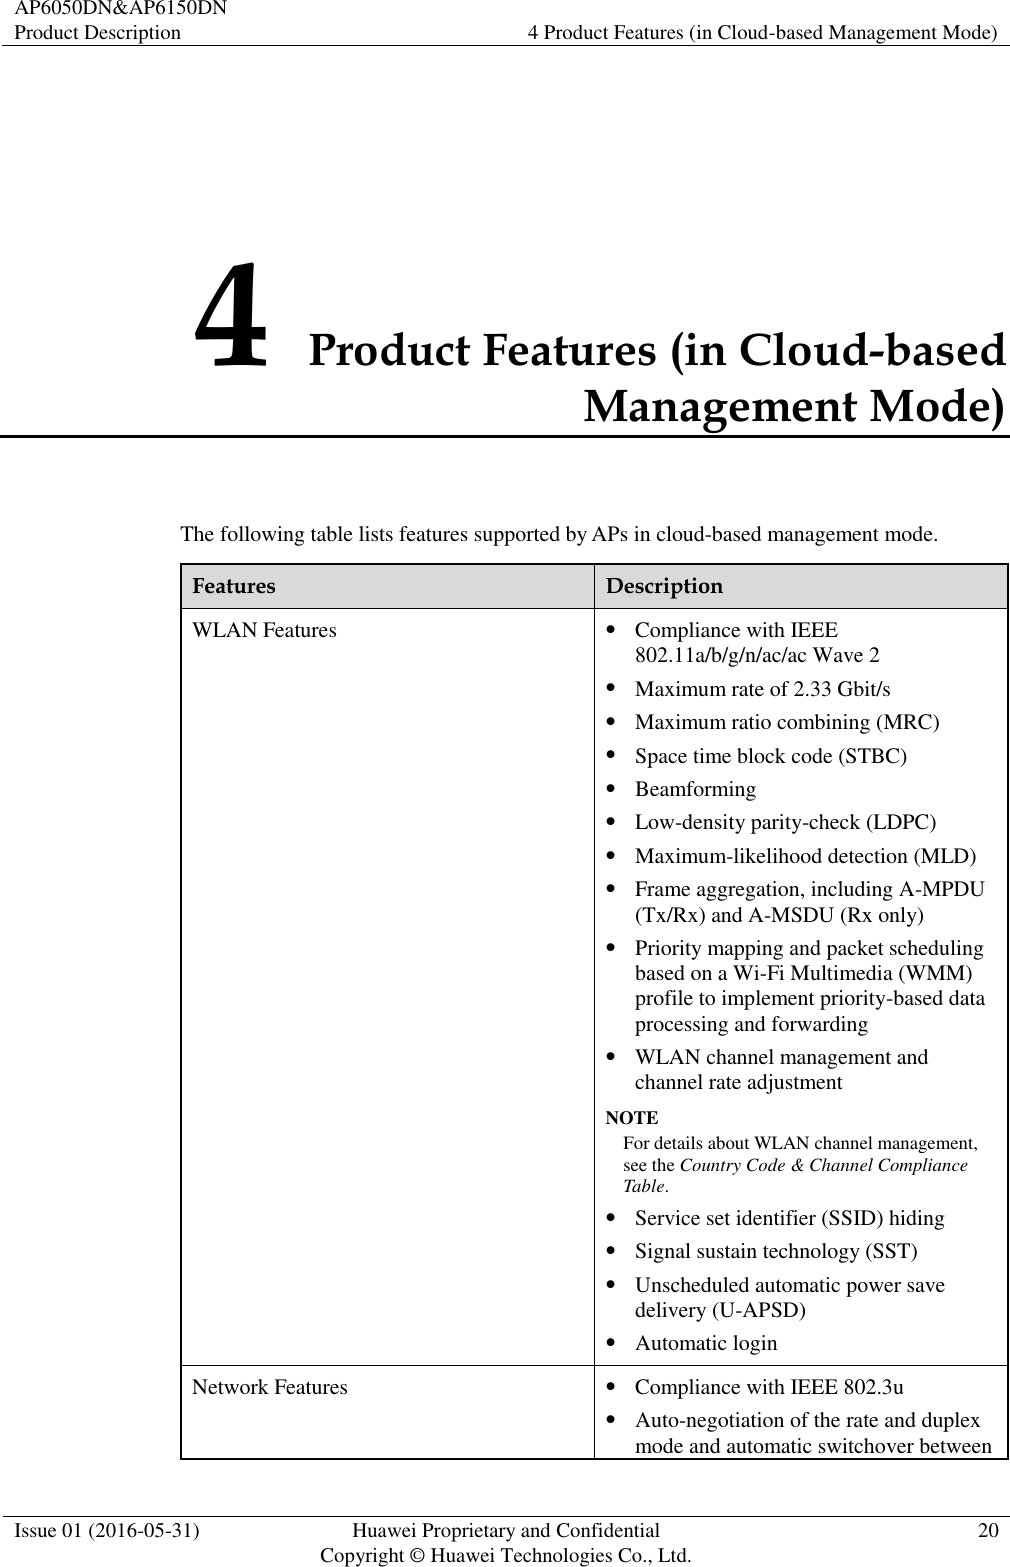 AP6050DN&amp;AP6150DN Product Description 4 Product Features (in Cloud-based Management Mode)  Issue 01 (2016-05-31) Huawei Proprietary and Confidential                                     Copyright © Huawei Technologies Co., Ltd. 20  4 Product Features (in Cloud-based Management Mode) The following table lists features supported by APs in cloud-based management mode. Features Description WLAN Features  Compliance with IEEE 802.11a/b/g/n/ac/ac Wave 2  Maximum rate of 2.33 Gbit/s  Maximum ratio combining (MRC)  Space time block code (STBC)  Beamforming  Low-density parity-check (LDPC)  Maximum-likelihood detection (MLD)  Frame aggregation, including A-MPDU (Tx/Rx) and A-MSDU (Rx only)  Priority mapping and packet scheduling based on a Wi-Fi Multimedia (WMM) profile to implement priority-based data processing and forwarding  WLAN channel management and channel rate adjustment NOTE For details about WLAN channel management, see the Country Code &amp; Channel Compliance Table.  Service set identifier (SSID) hiding  Signal sustain technology (SST)  Unscheduled automatic power save delivery (U-APSD)  Automatic login Network Features  Compliance with IEEE 802.3u  Auto-negotiation of the rate and duplex mode and automatic switchover between 